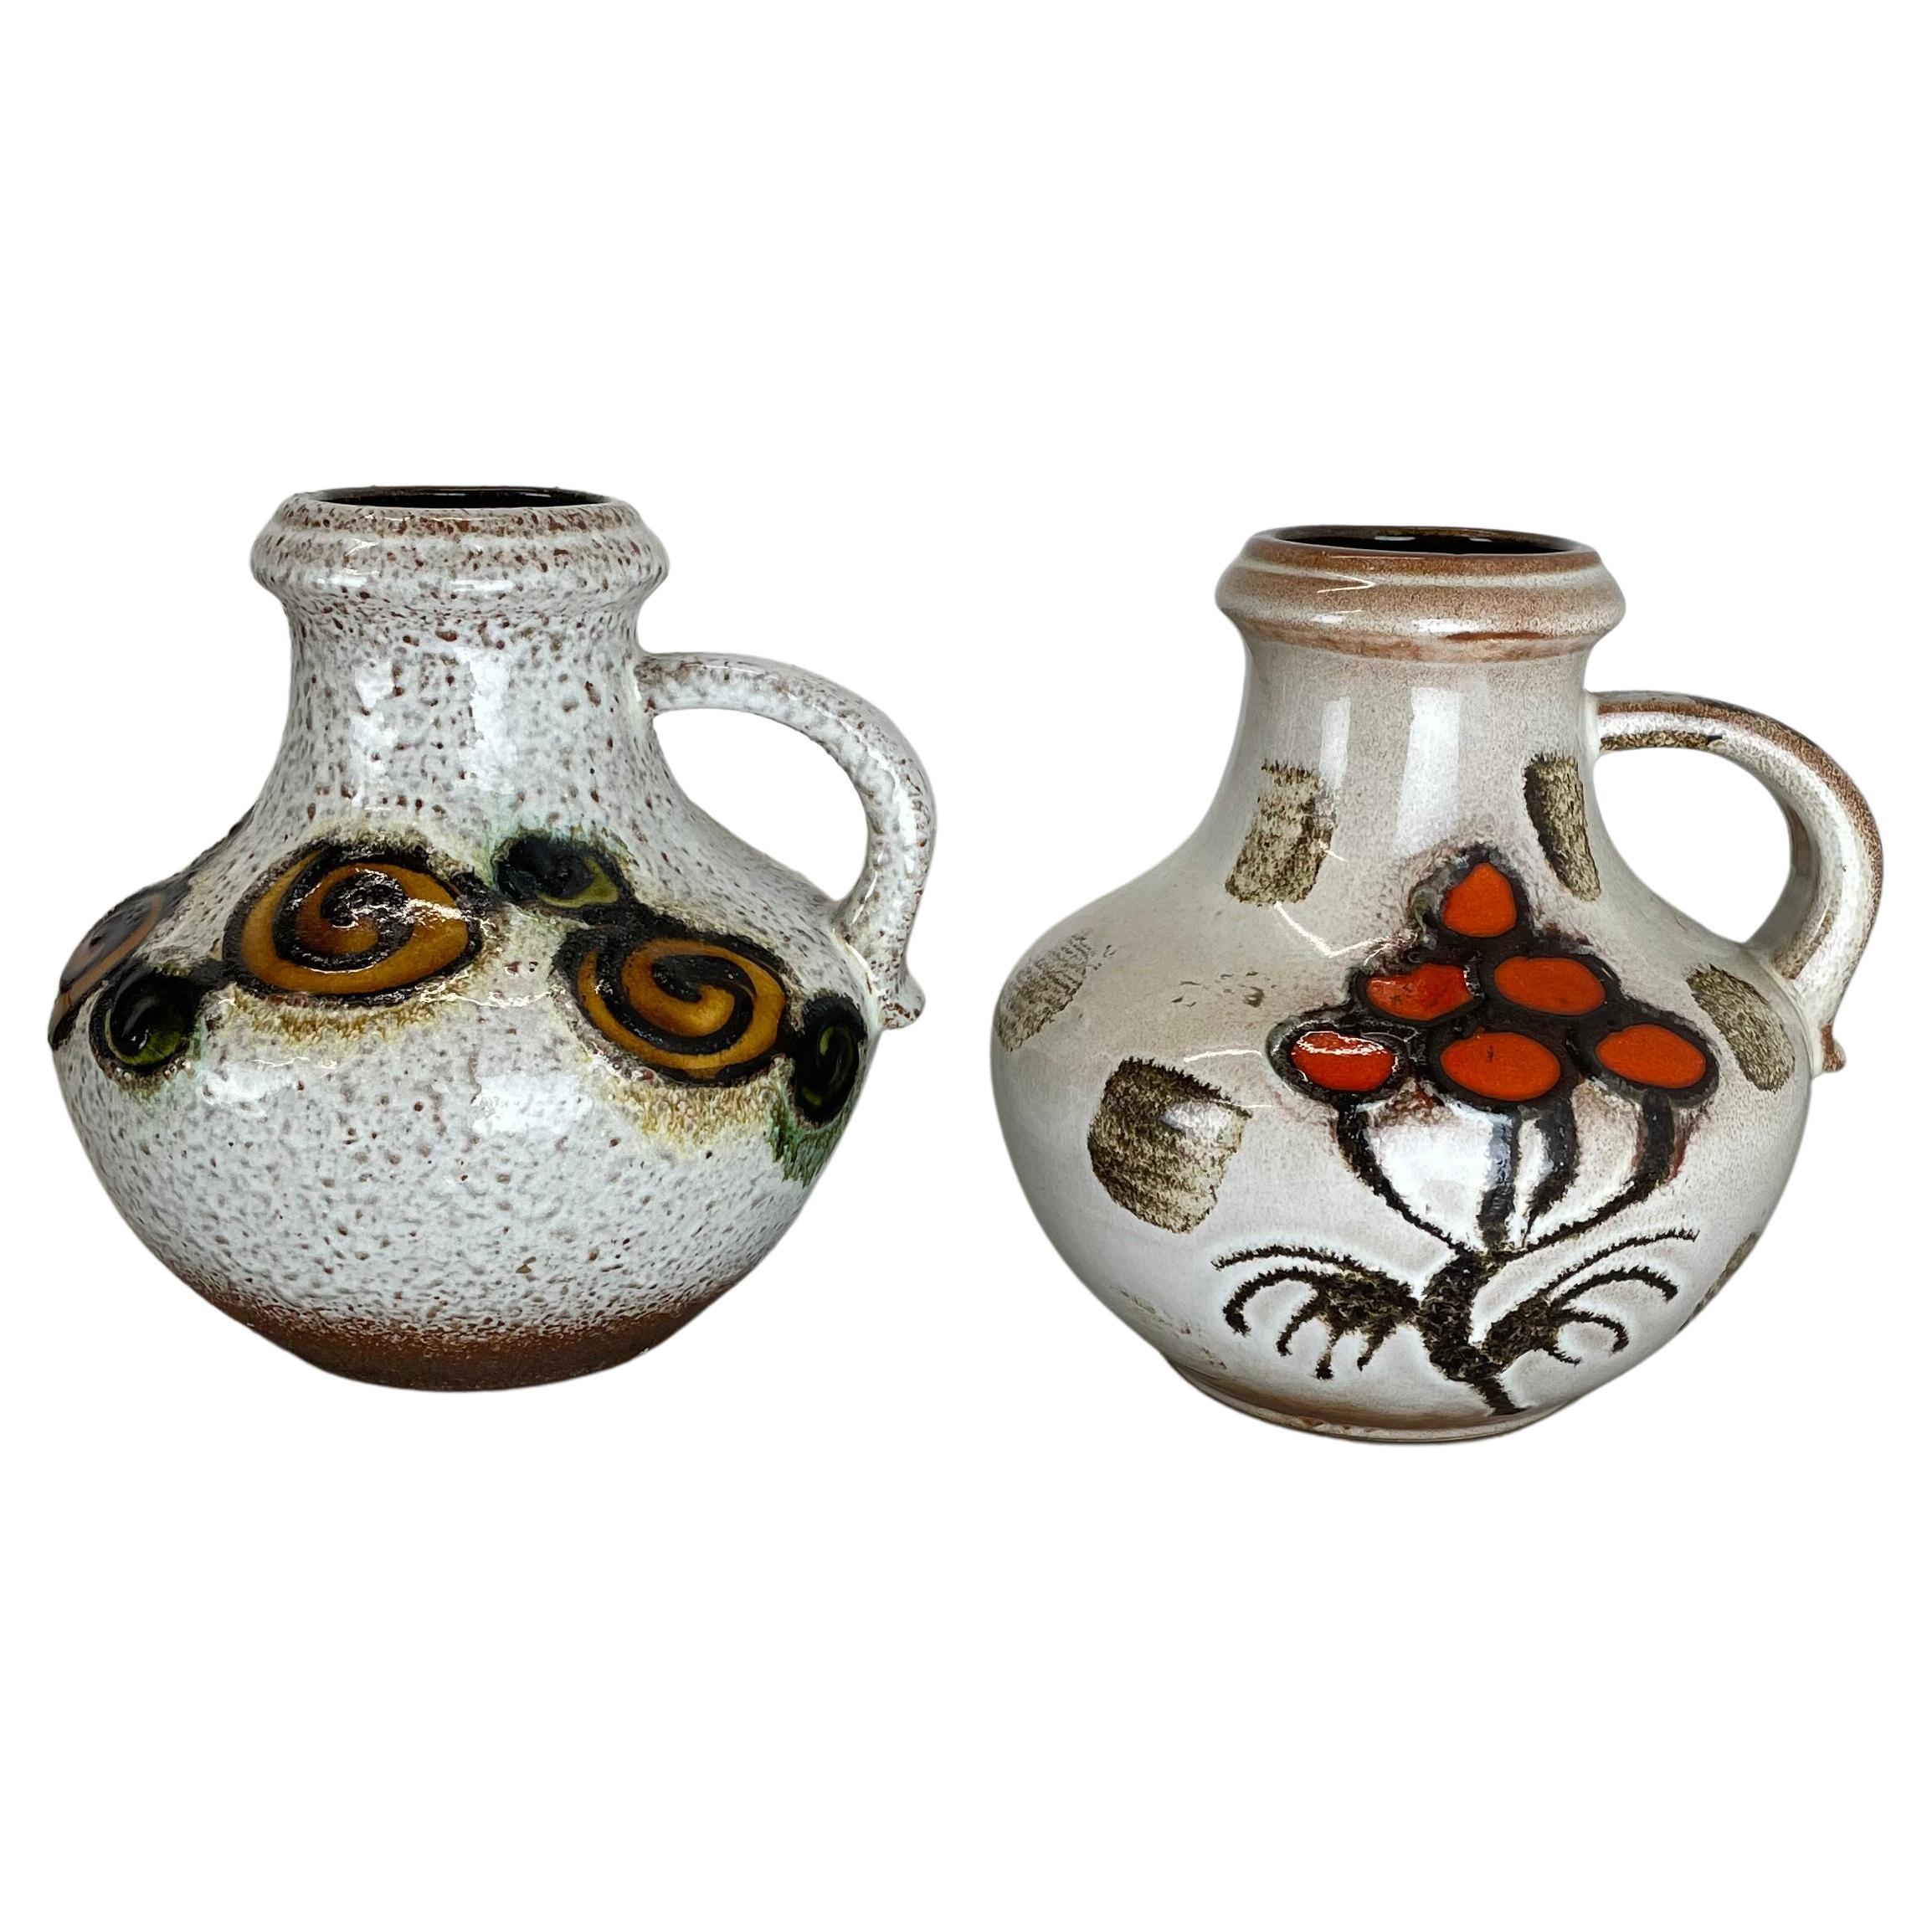 Set of Two Pottery Fat Lava Vases "FLORAL" by Scheurich, Germany, 1970s